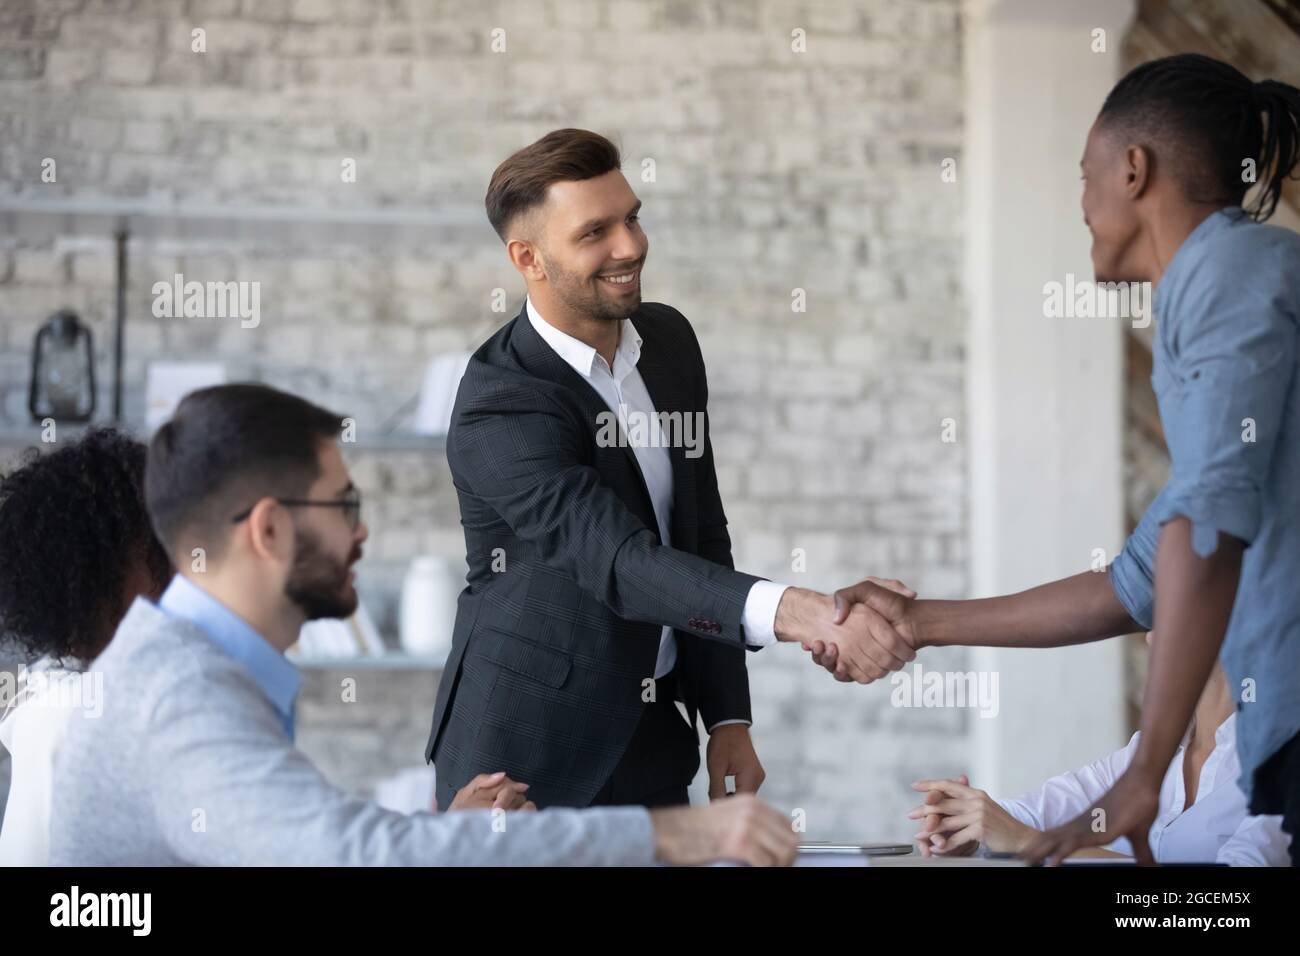 Smiling diverse businesspeople handshake at office meeting Stock Photo